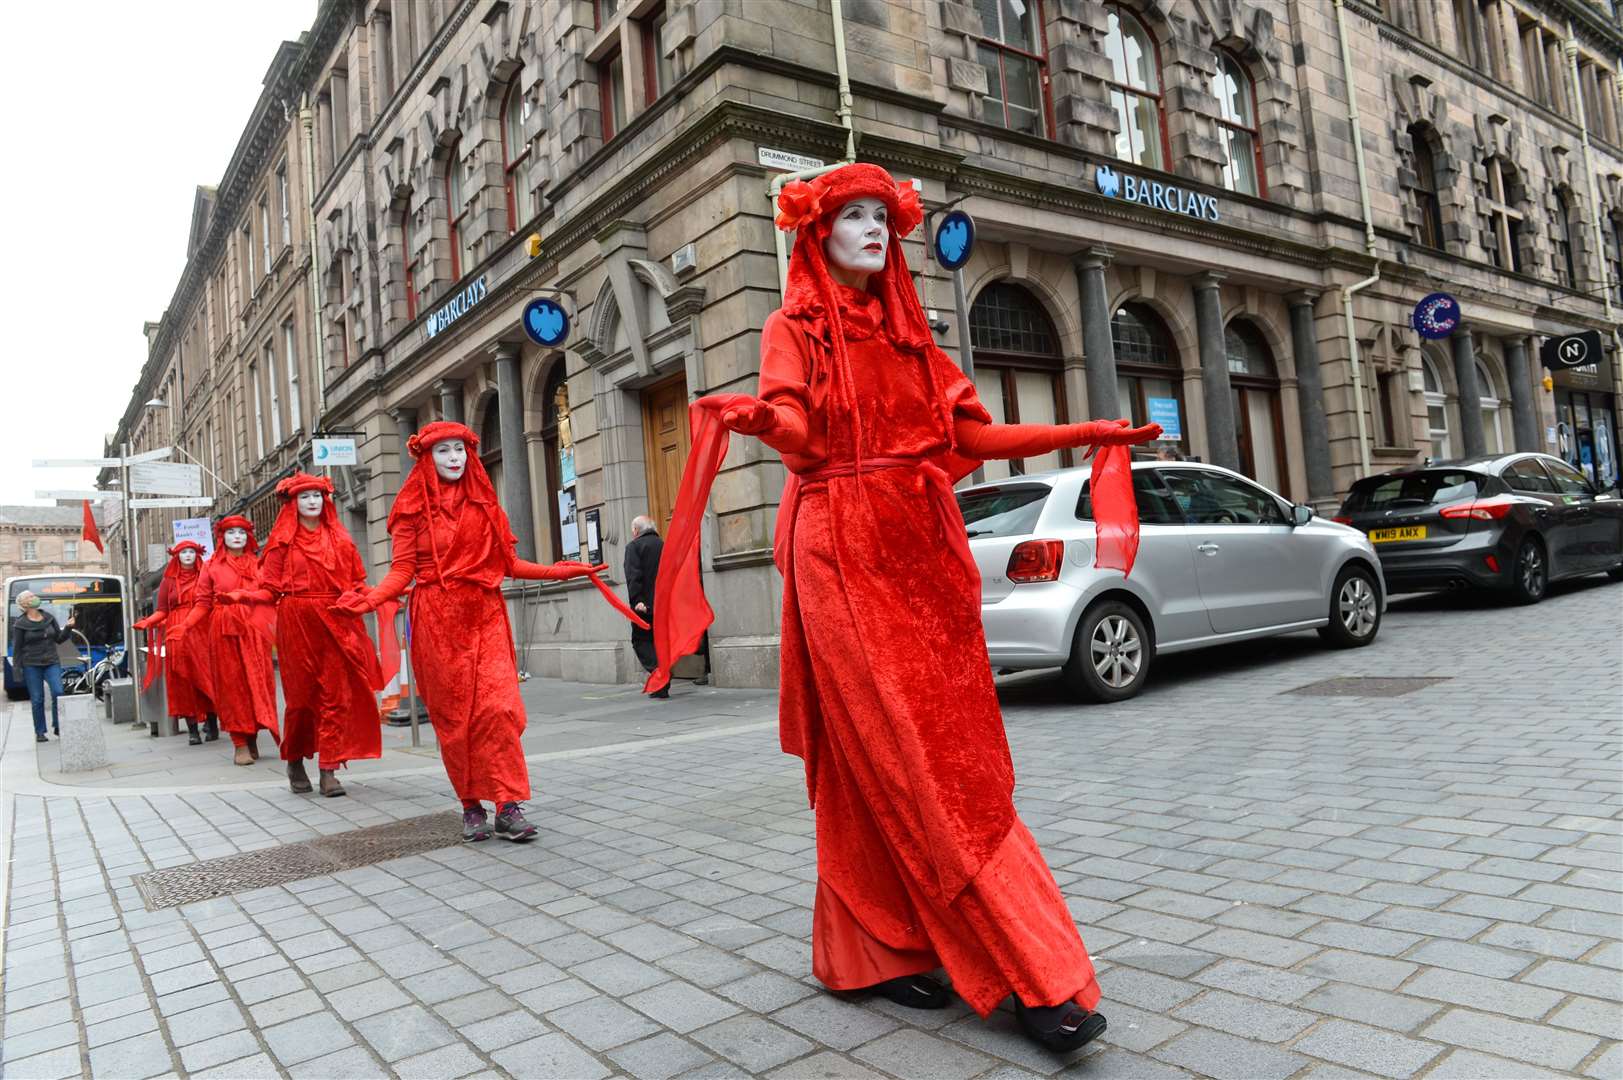 Activists from Extinction Rebellion have previously highlighted their message about climate change during demonstrations in Inverness.